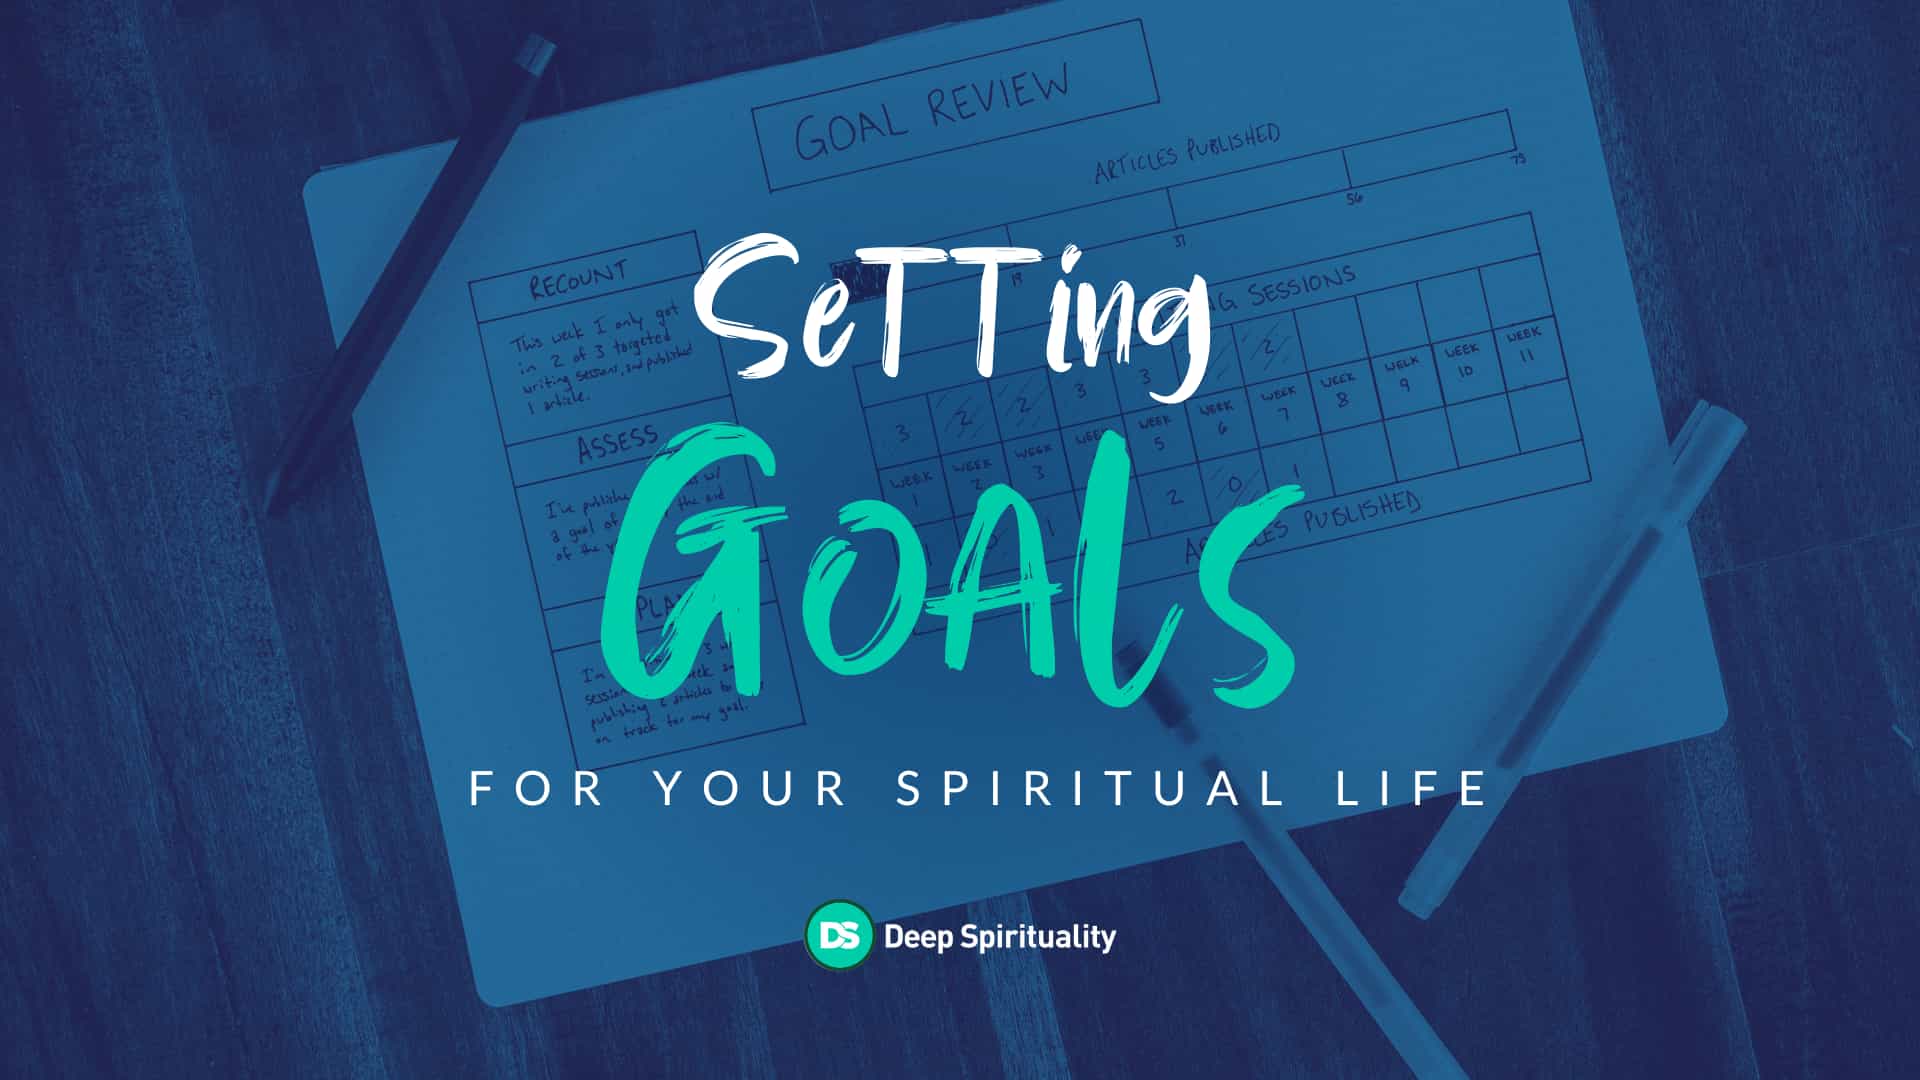 How to Set Goals for Your Spiritual Life 42